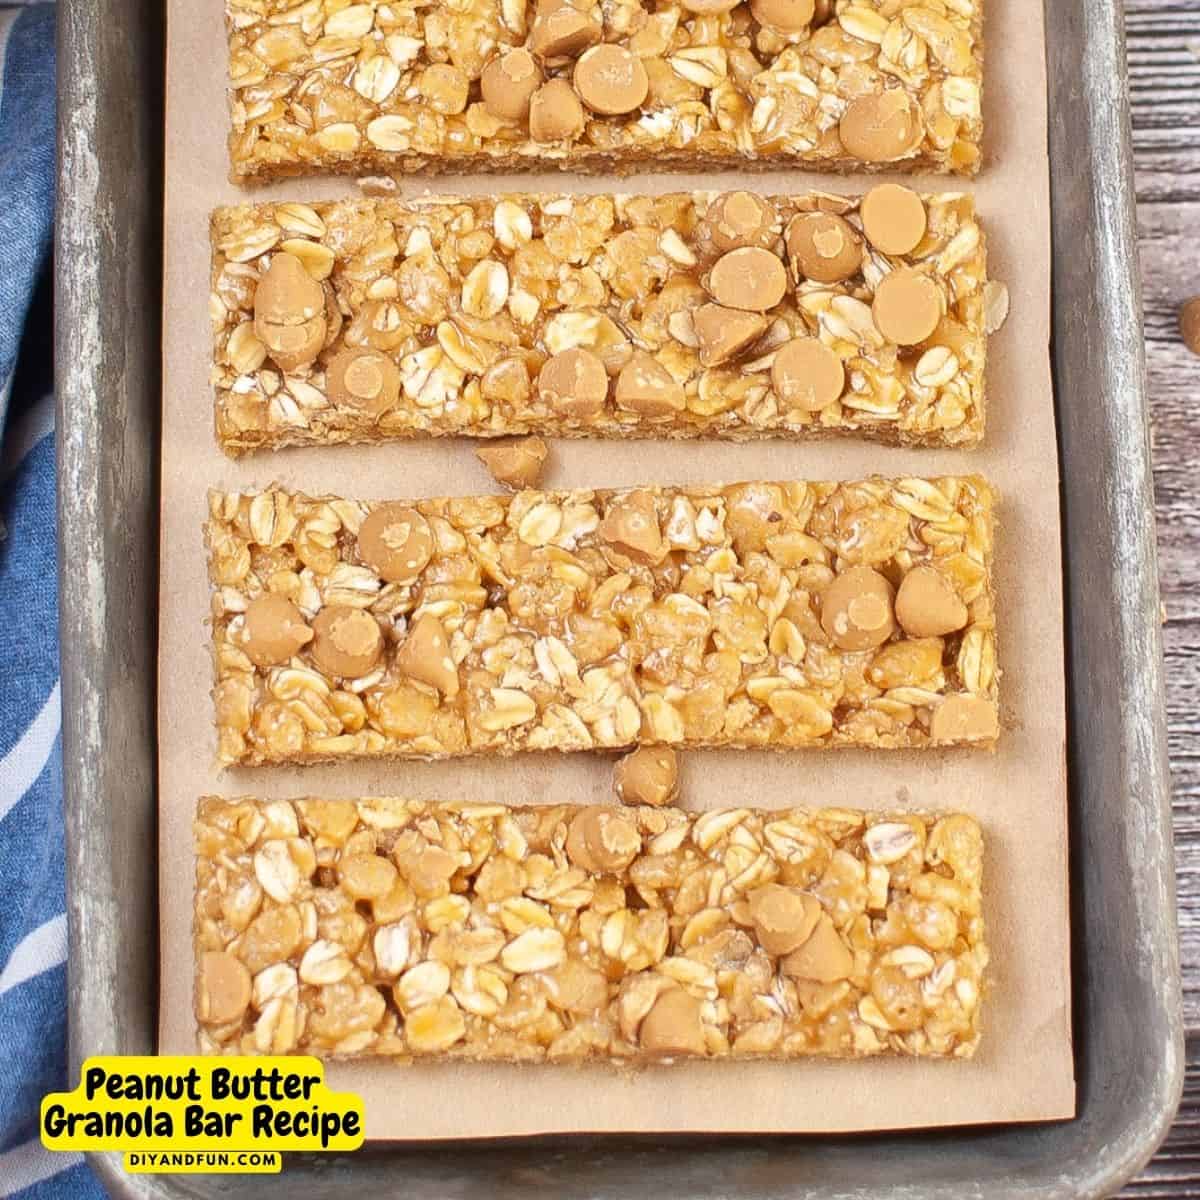 Peanut Butter Granola Bars Recipe, a quick and easy no bake snack recipe made with oats and peanut butter chips.